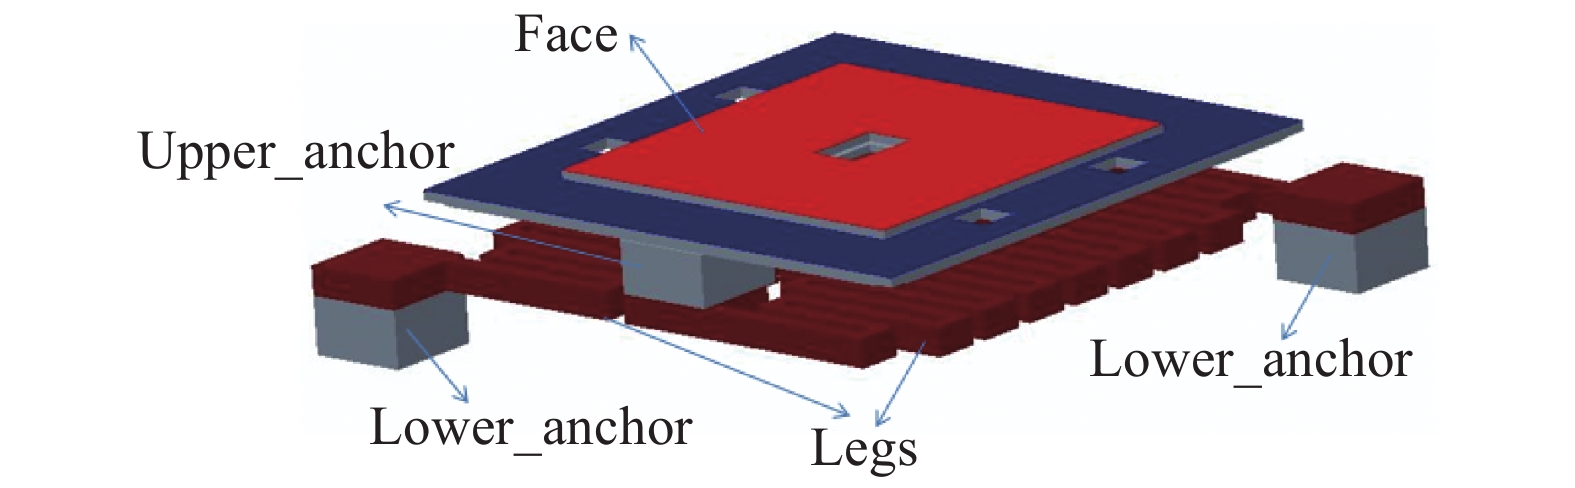 Double-layer structure of microbolometer